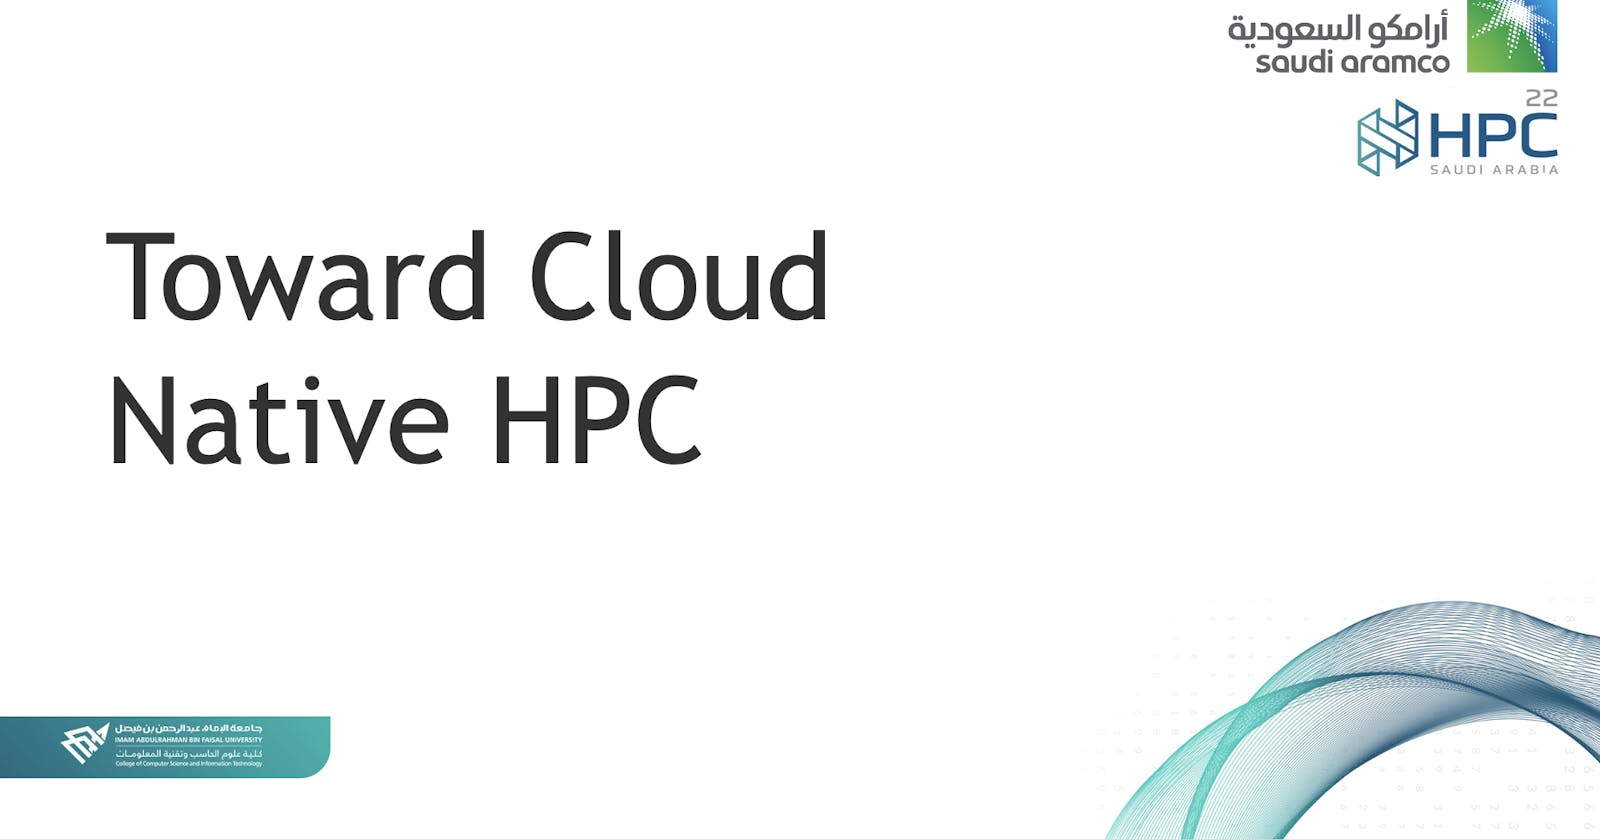 Cloud Native HPC scattered thoughts and resources.